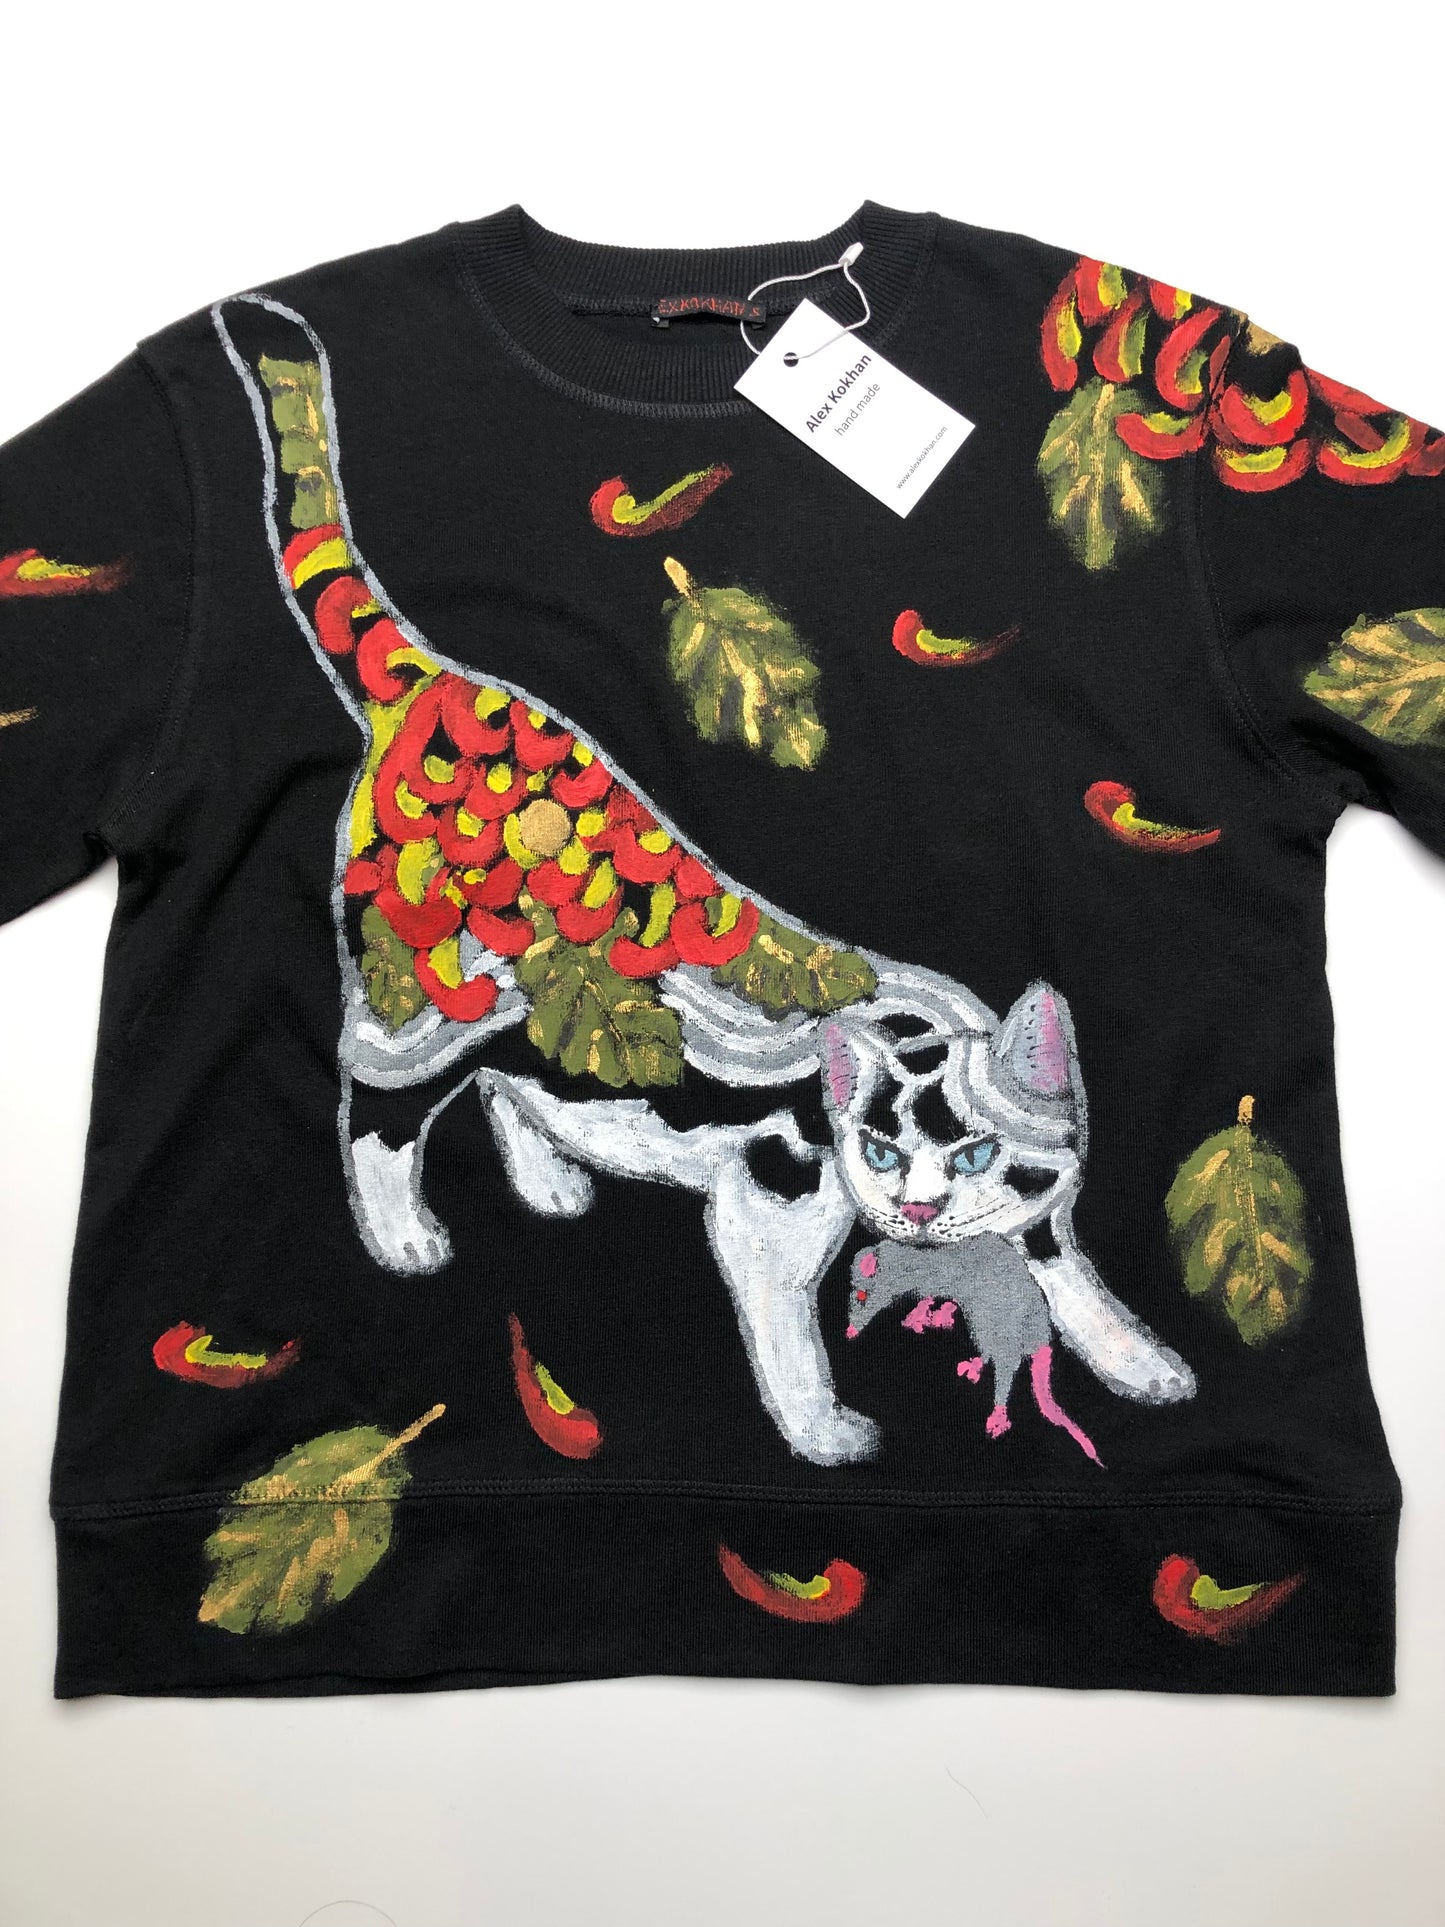 Women's long sleeve t-shirt cat and mouse